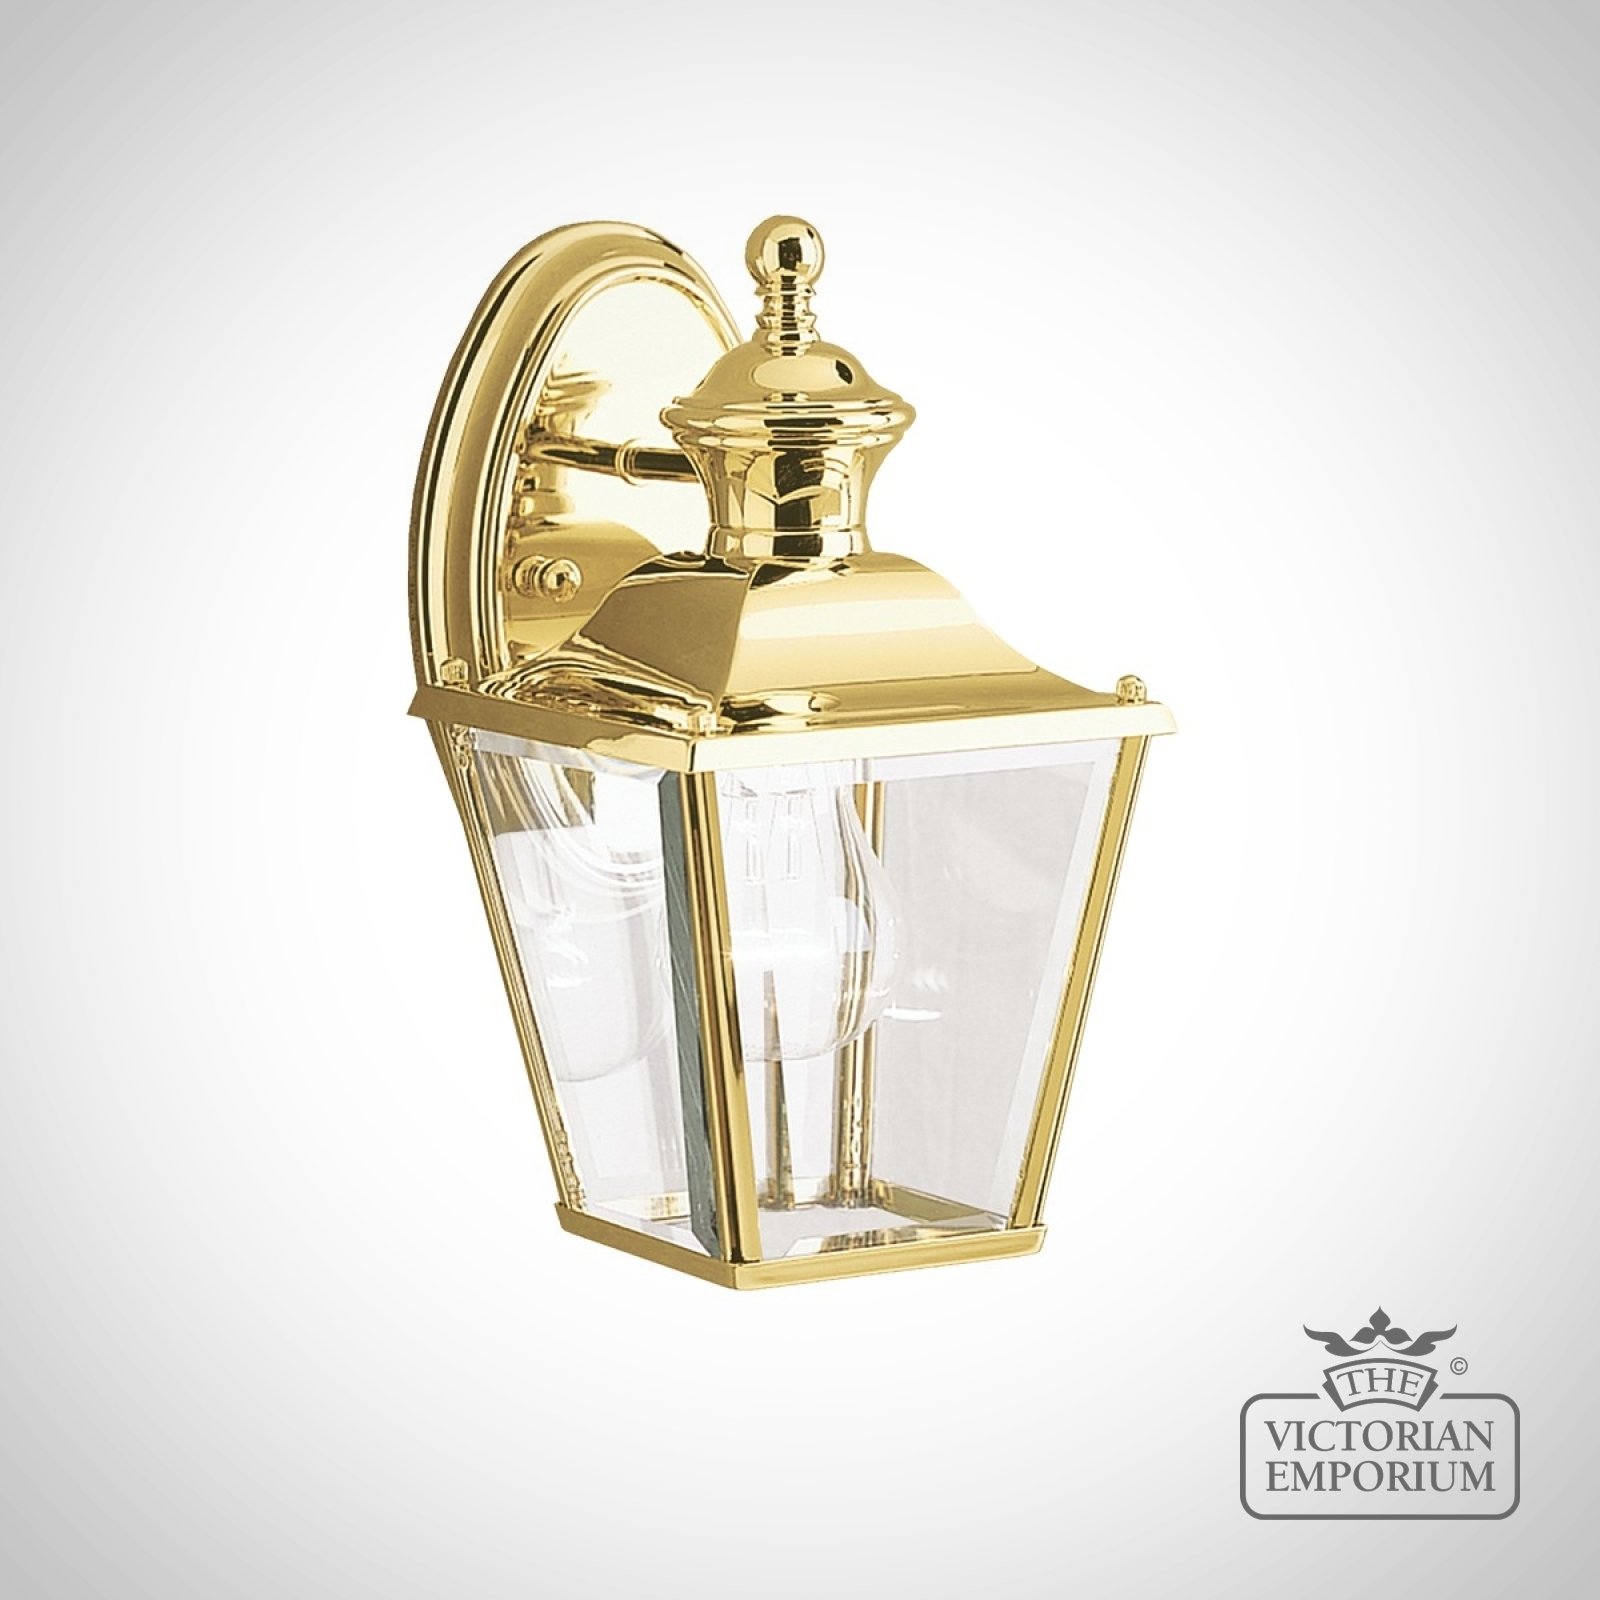 Bay small wall lantern in polished brass